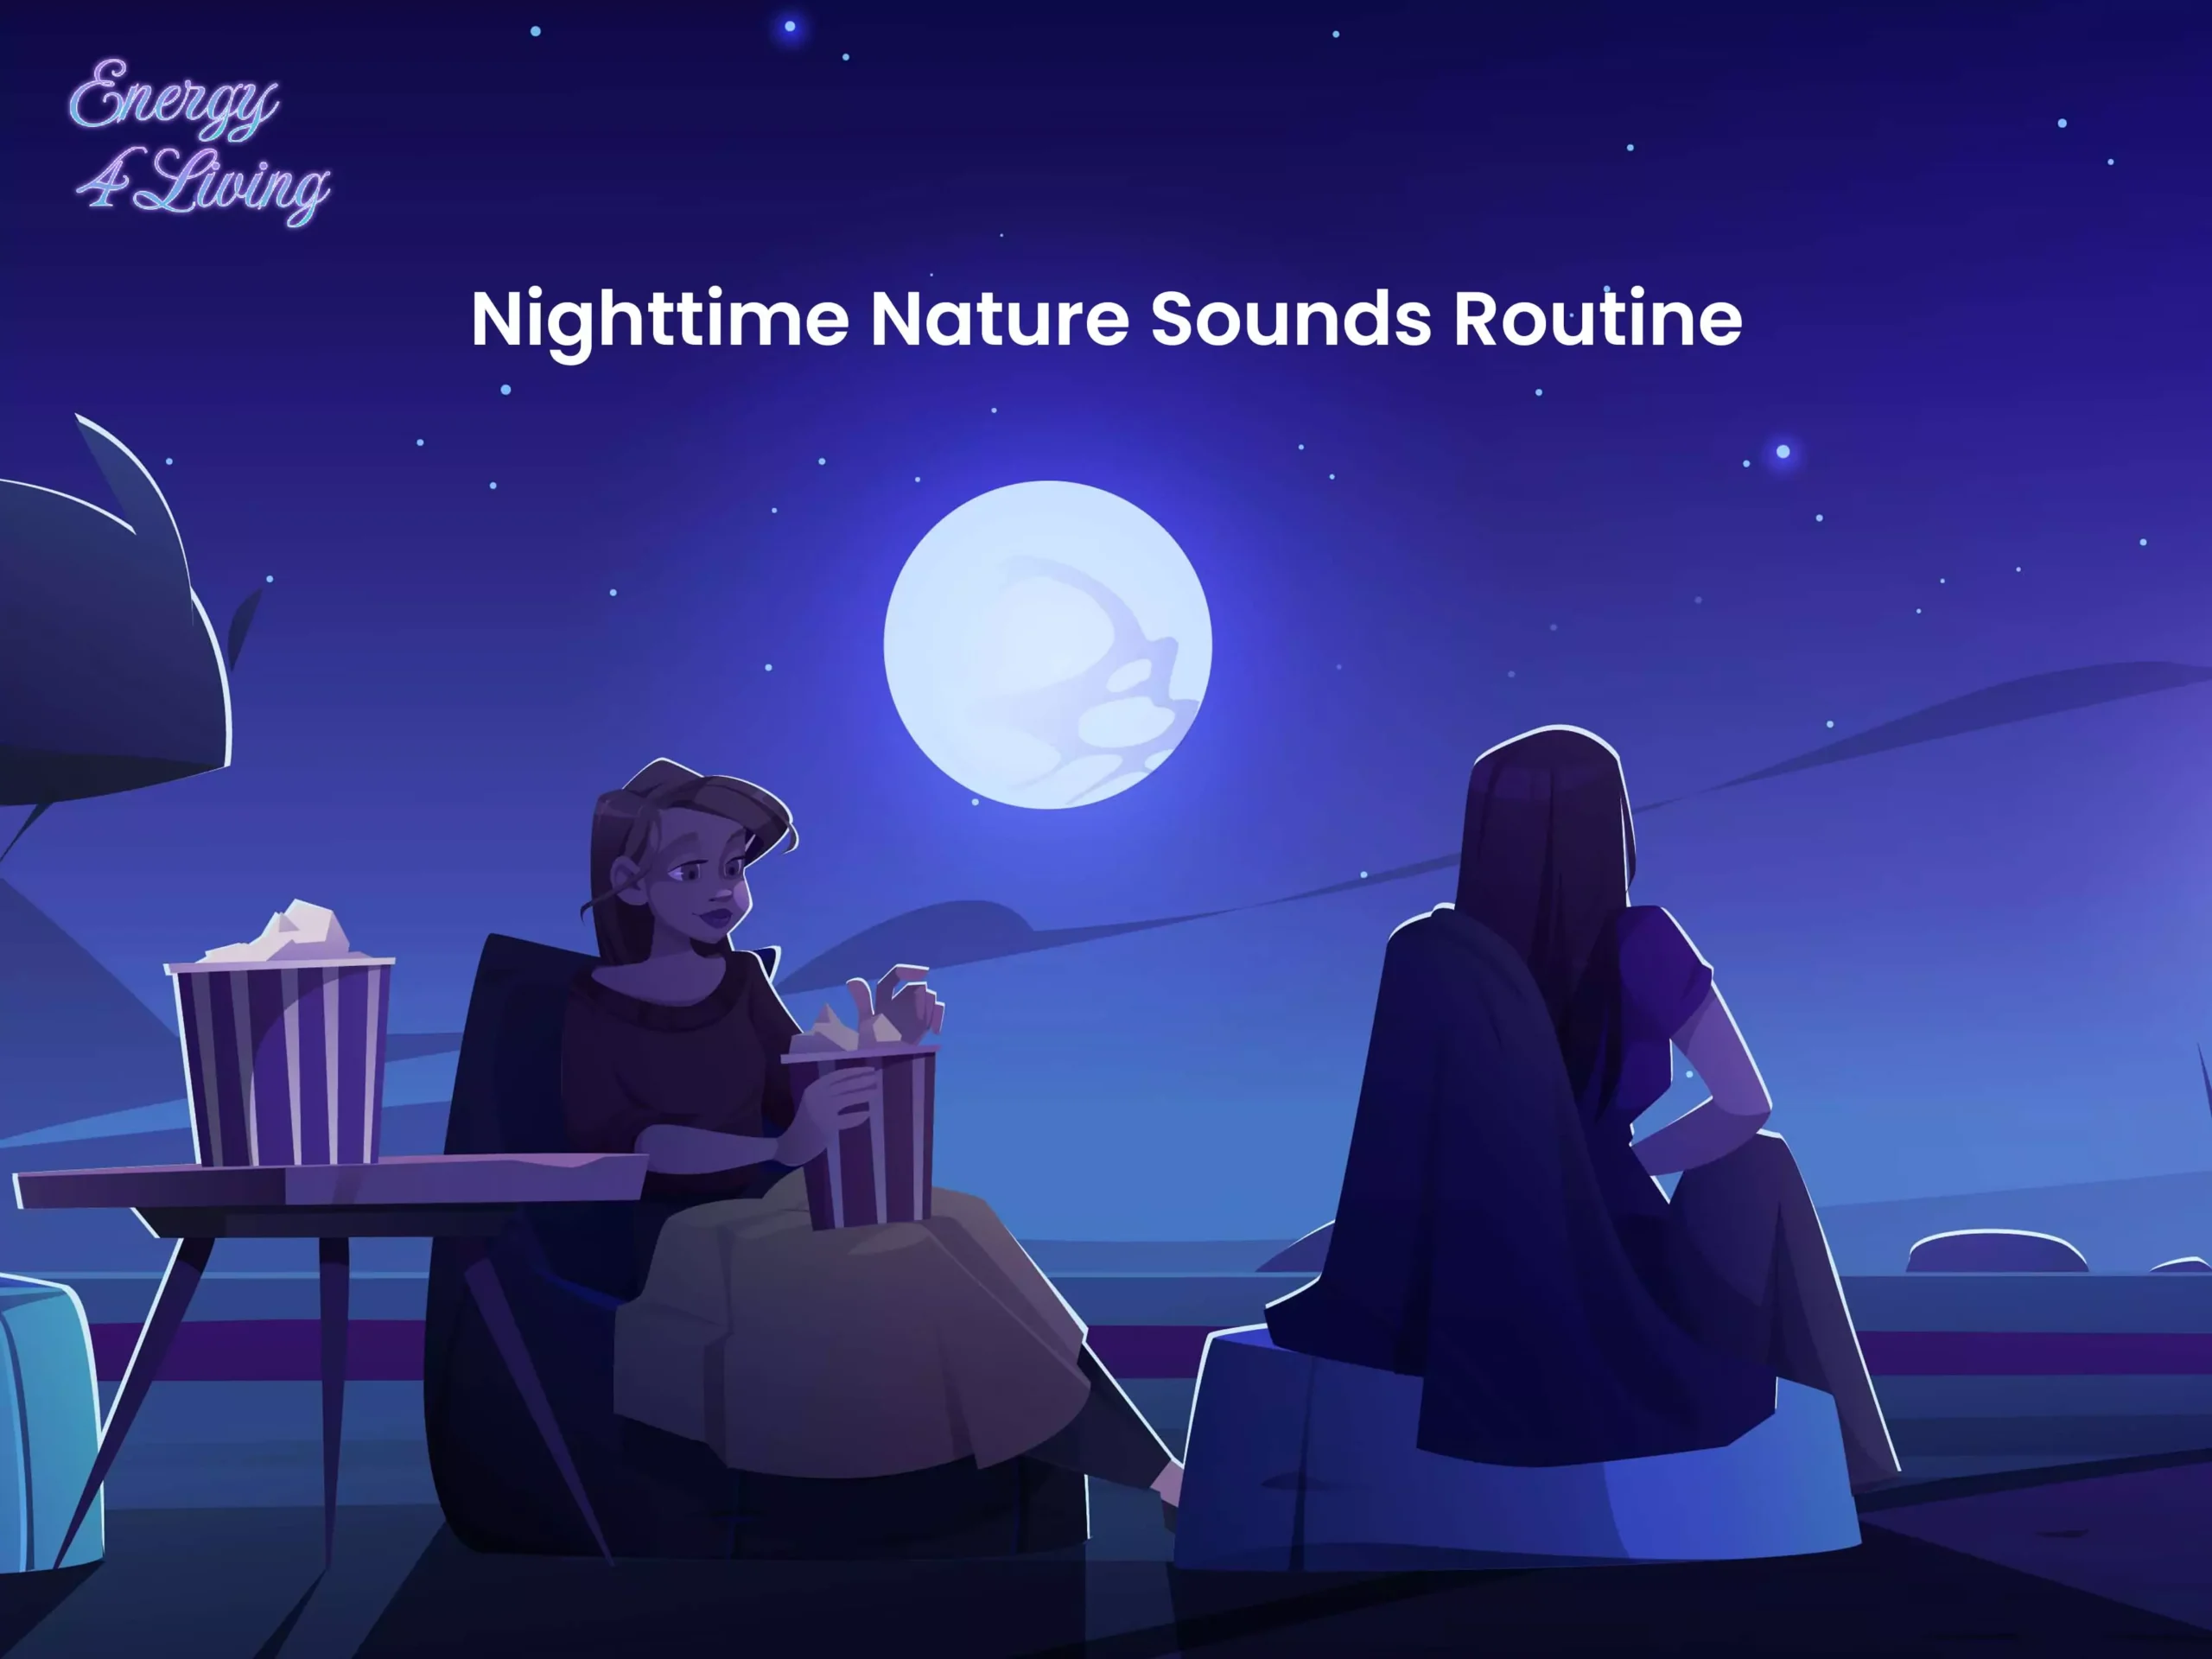 Nighttime Nature Sounds Routine